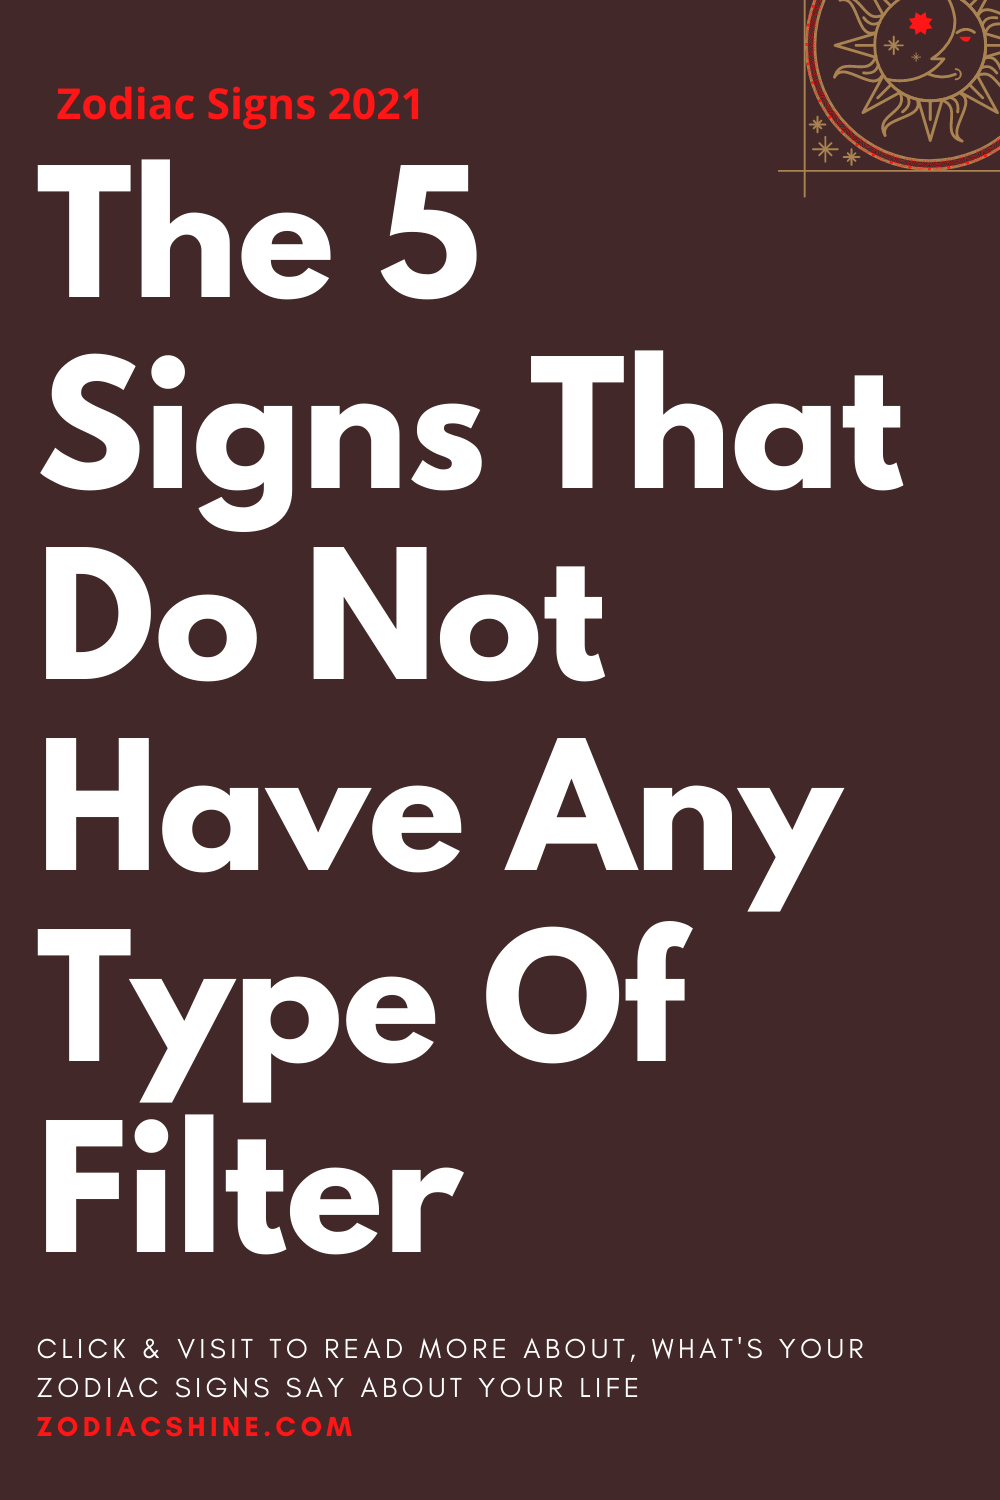 The 5 Signs That Do Not Have Any Type Of Filter